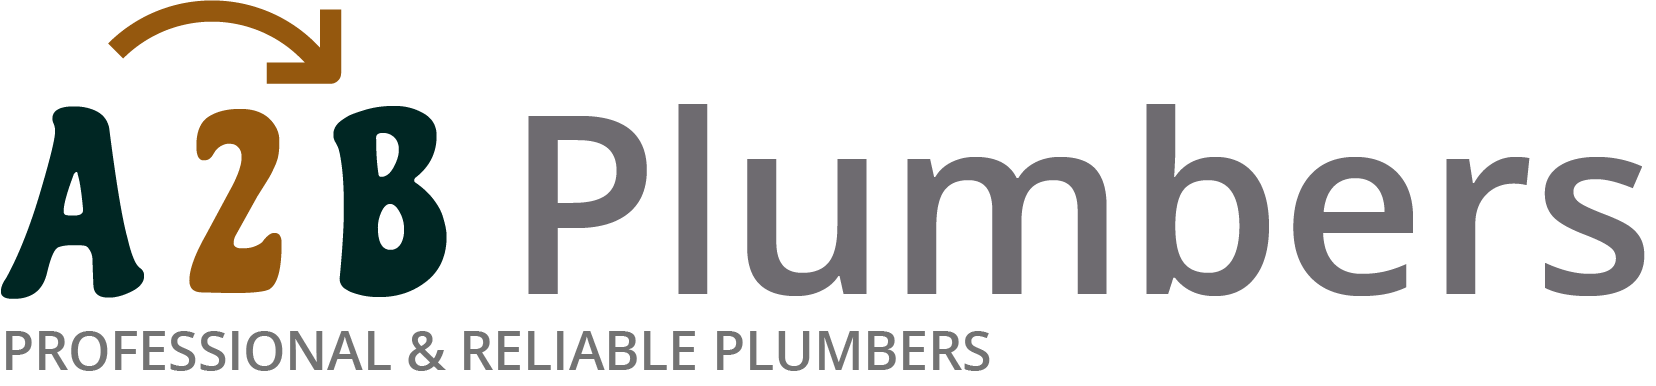 If you need a boiler installed, a radiator repaired or a leaking tap fixed, call us now - we provide services for properties in Elmers End and the local area.